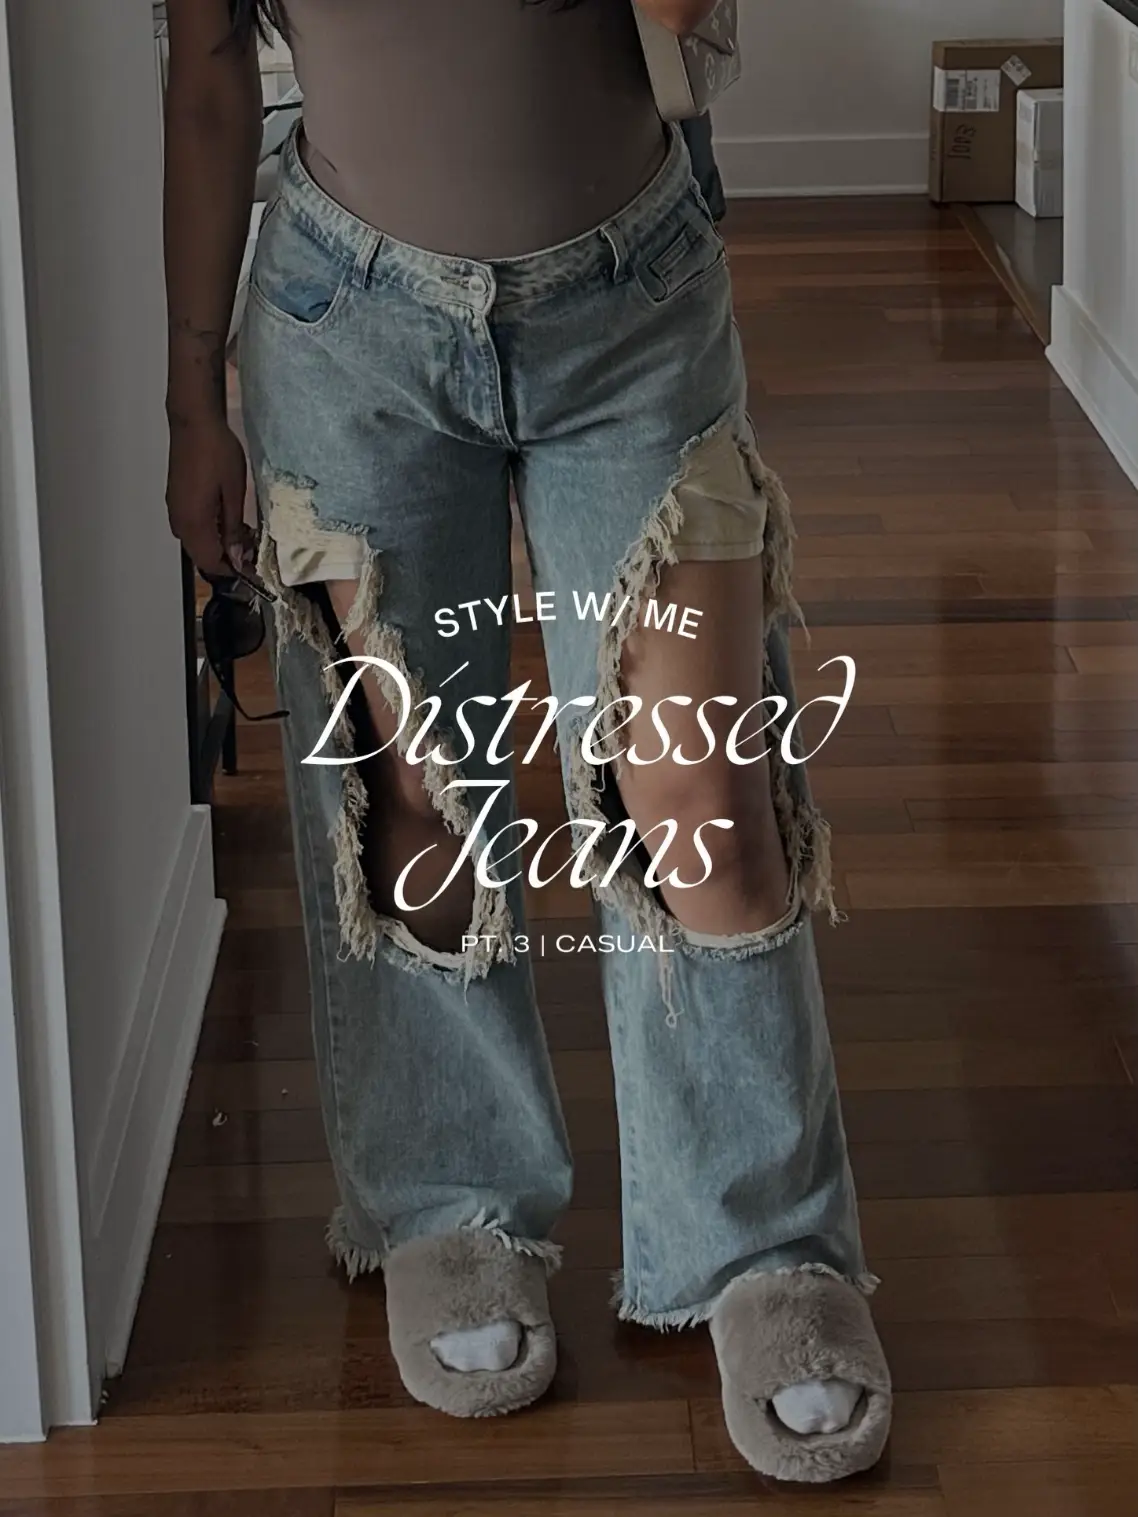 Aeo AE Denim X High-Waisted Jegging  Cute ripped jeans, Women jeans,  Ripped jeans outfit